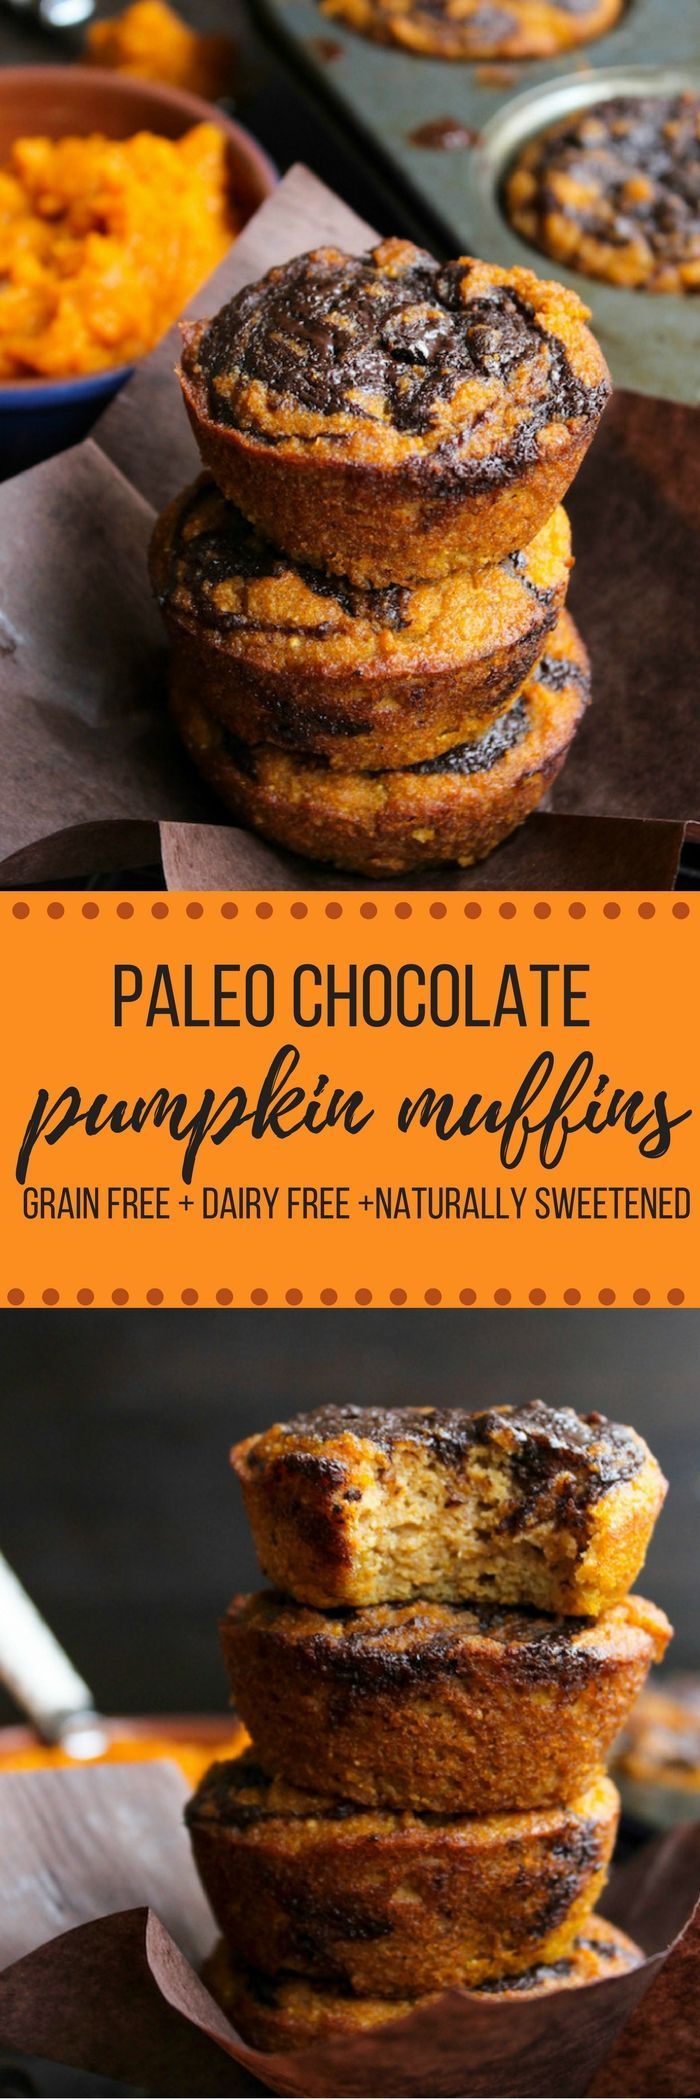 Paleo Pumpkin Muffins with a Chocolate Swirl Top – a simple, one bowl recipe…